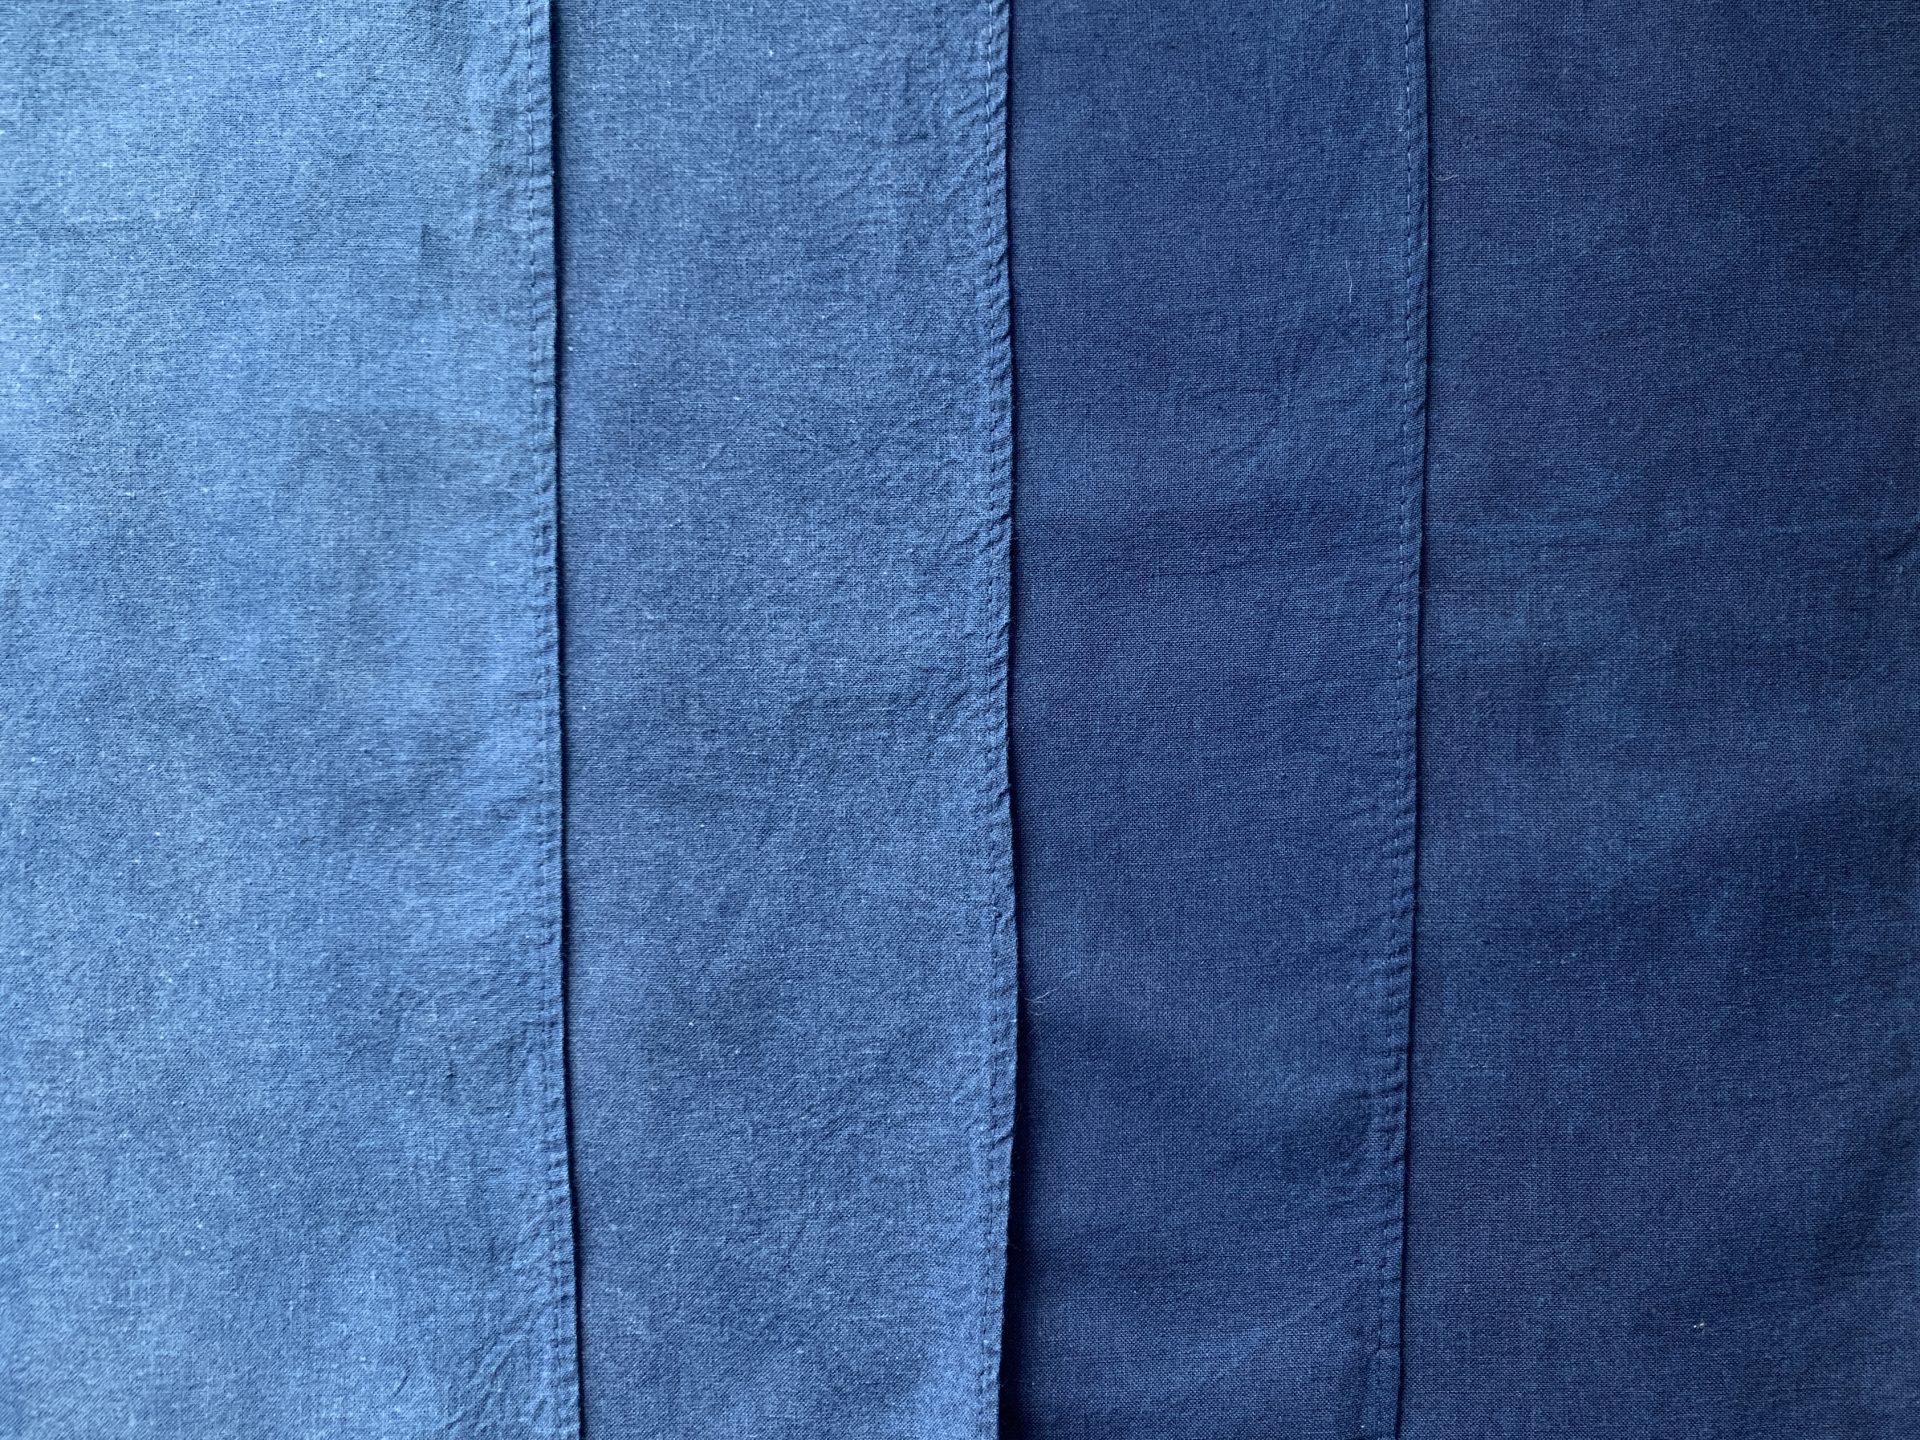 Four strips of cotton in varying shades of blue, from lightest on the left to darkest on the right